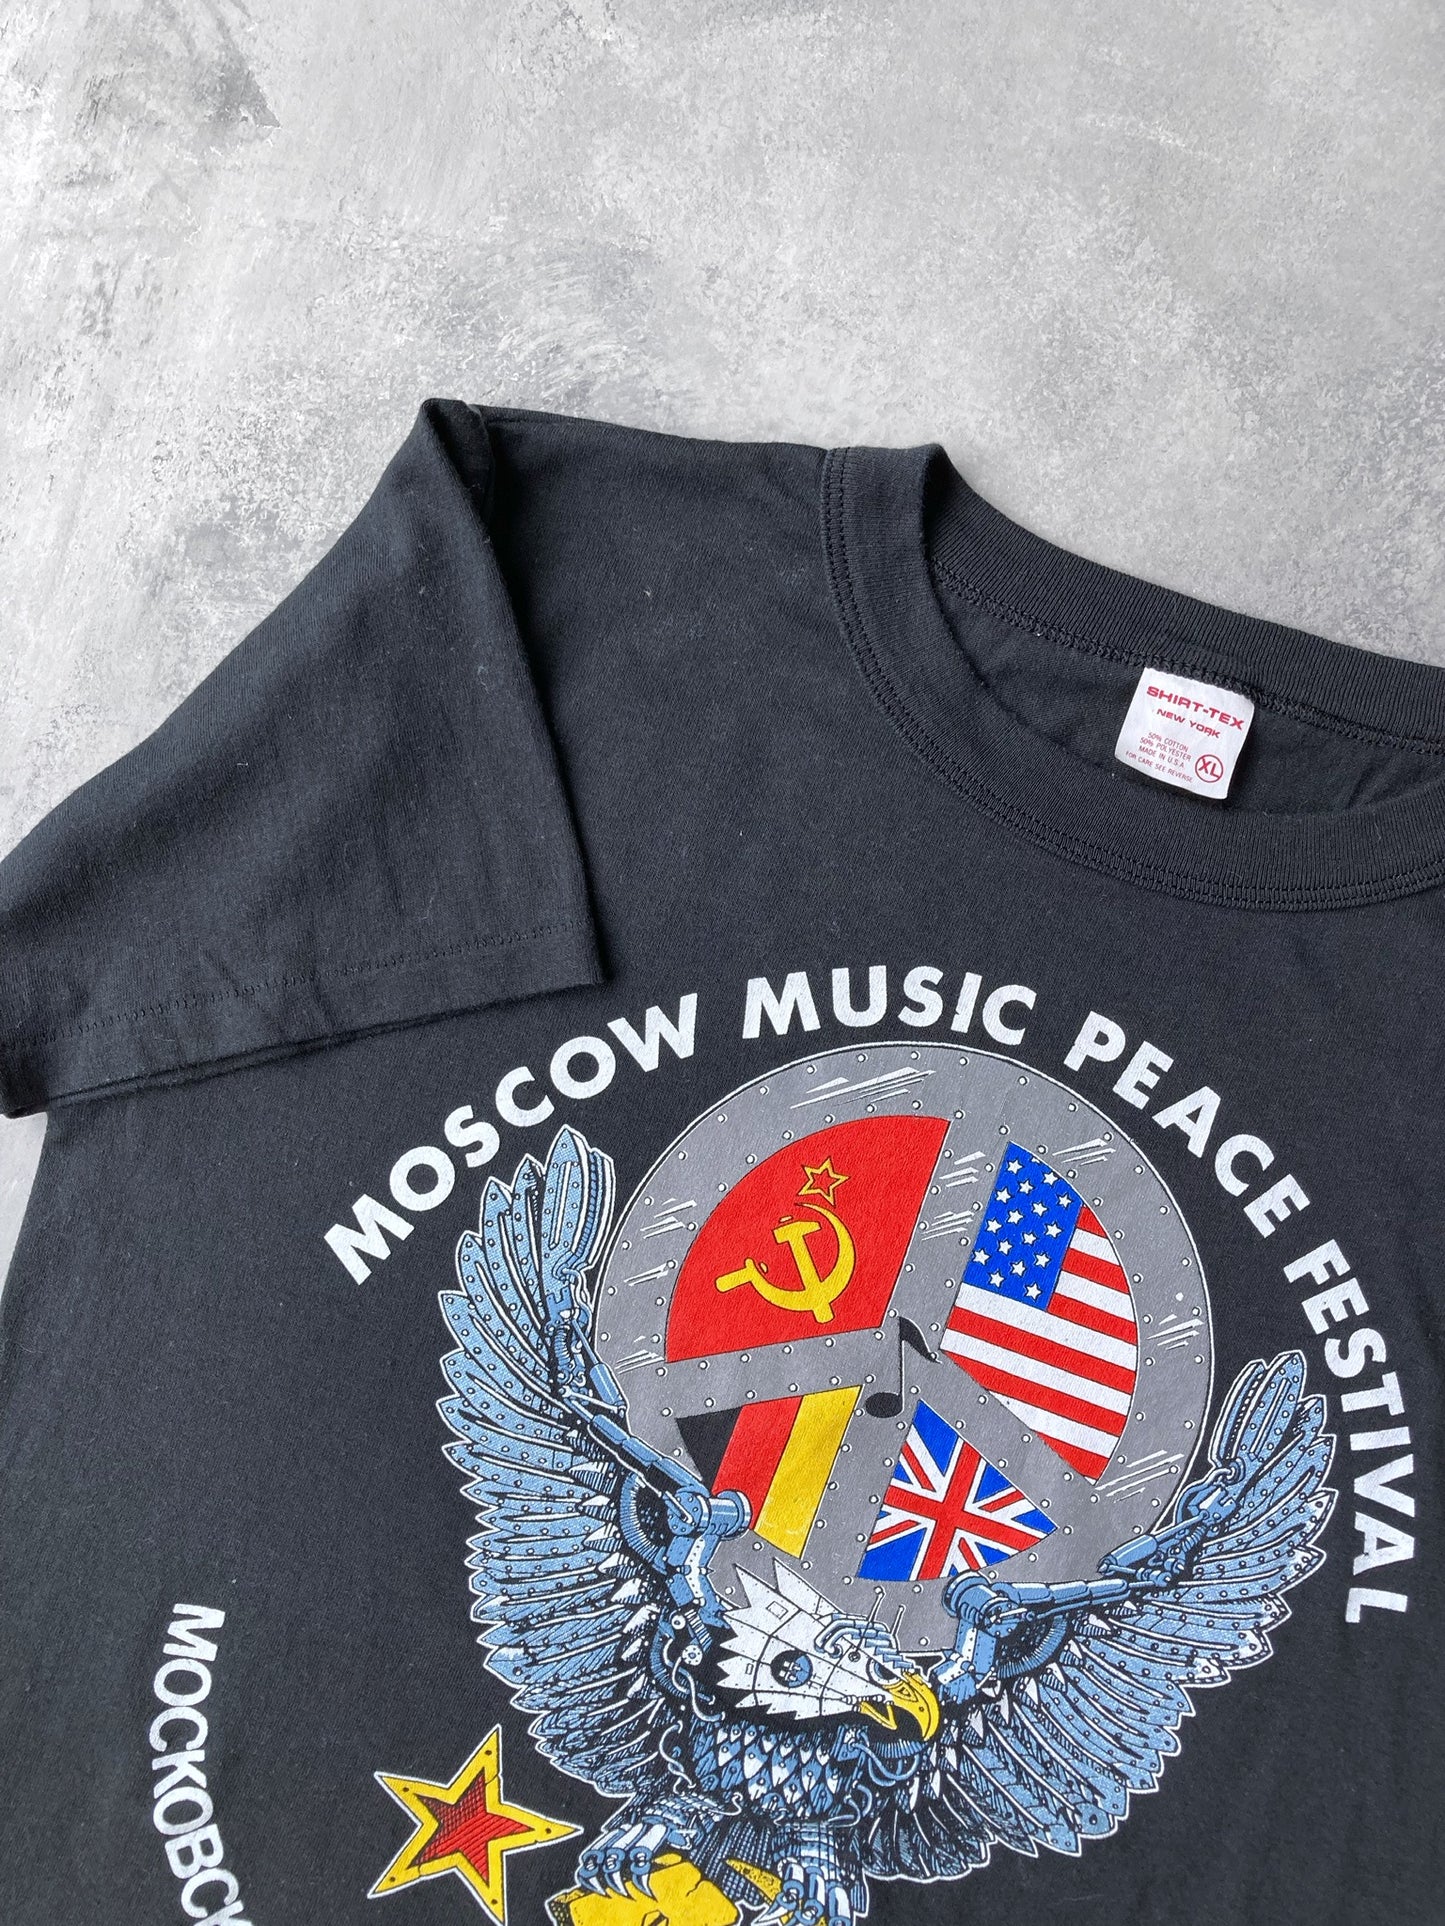 Moscow Music Peace Festival T-Shirt 80's - Large